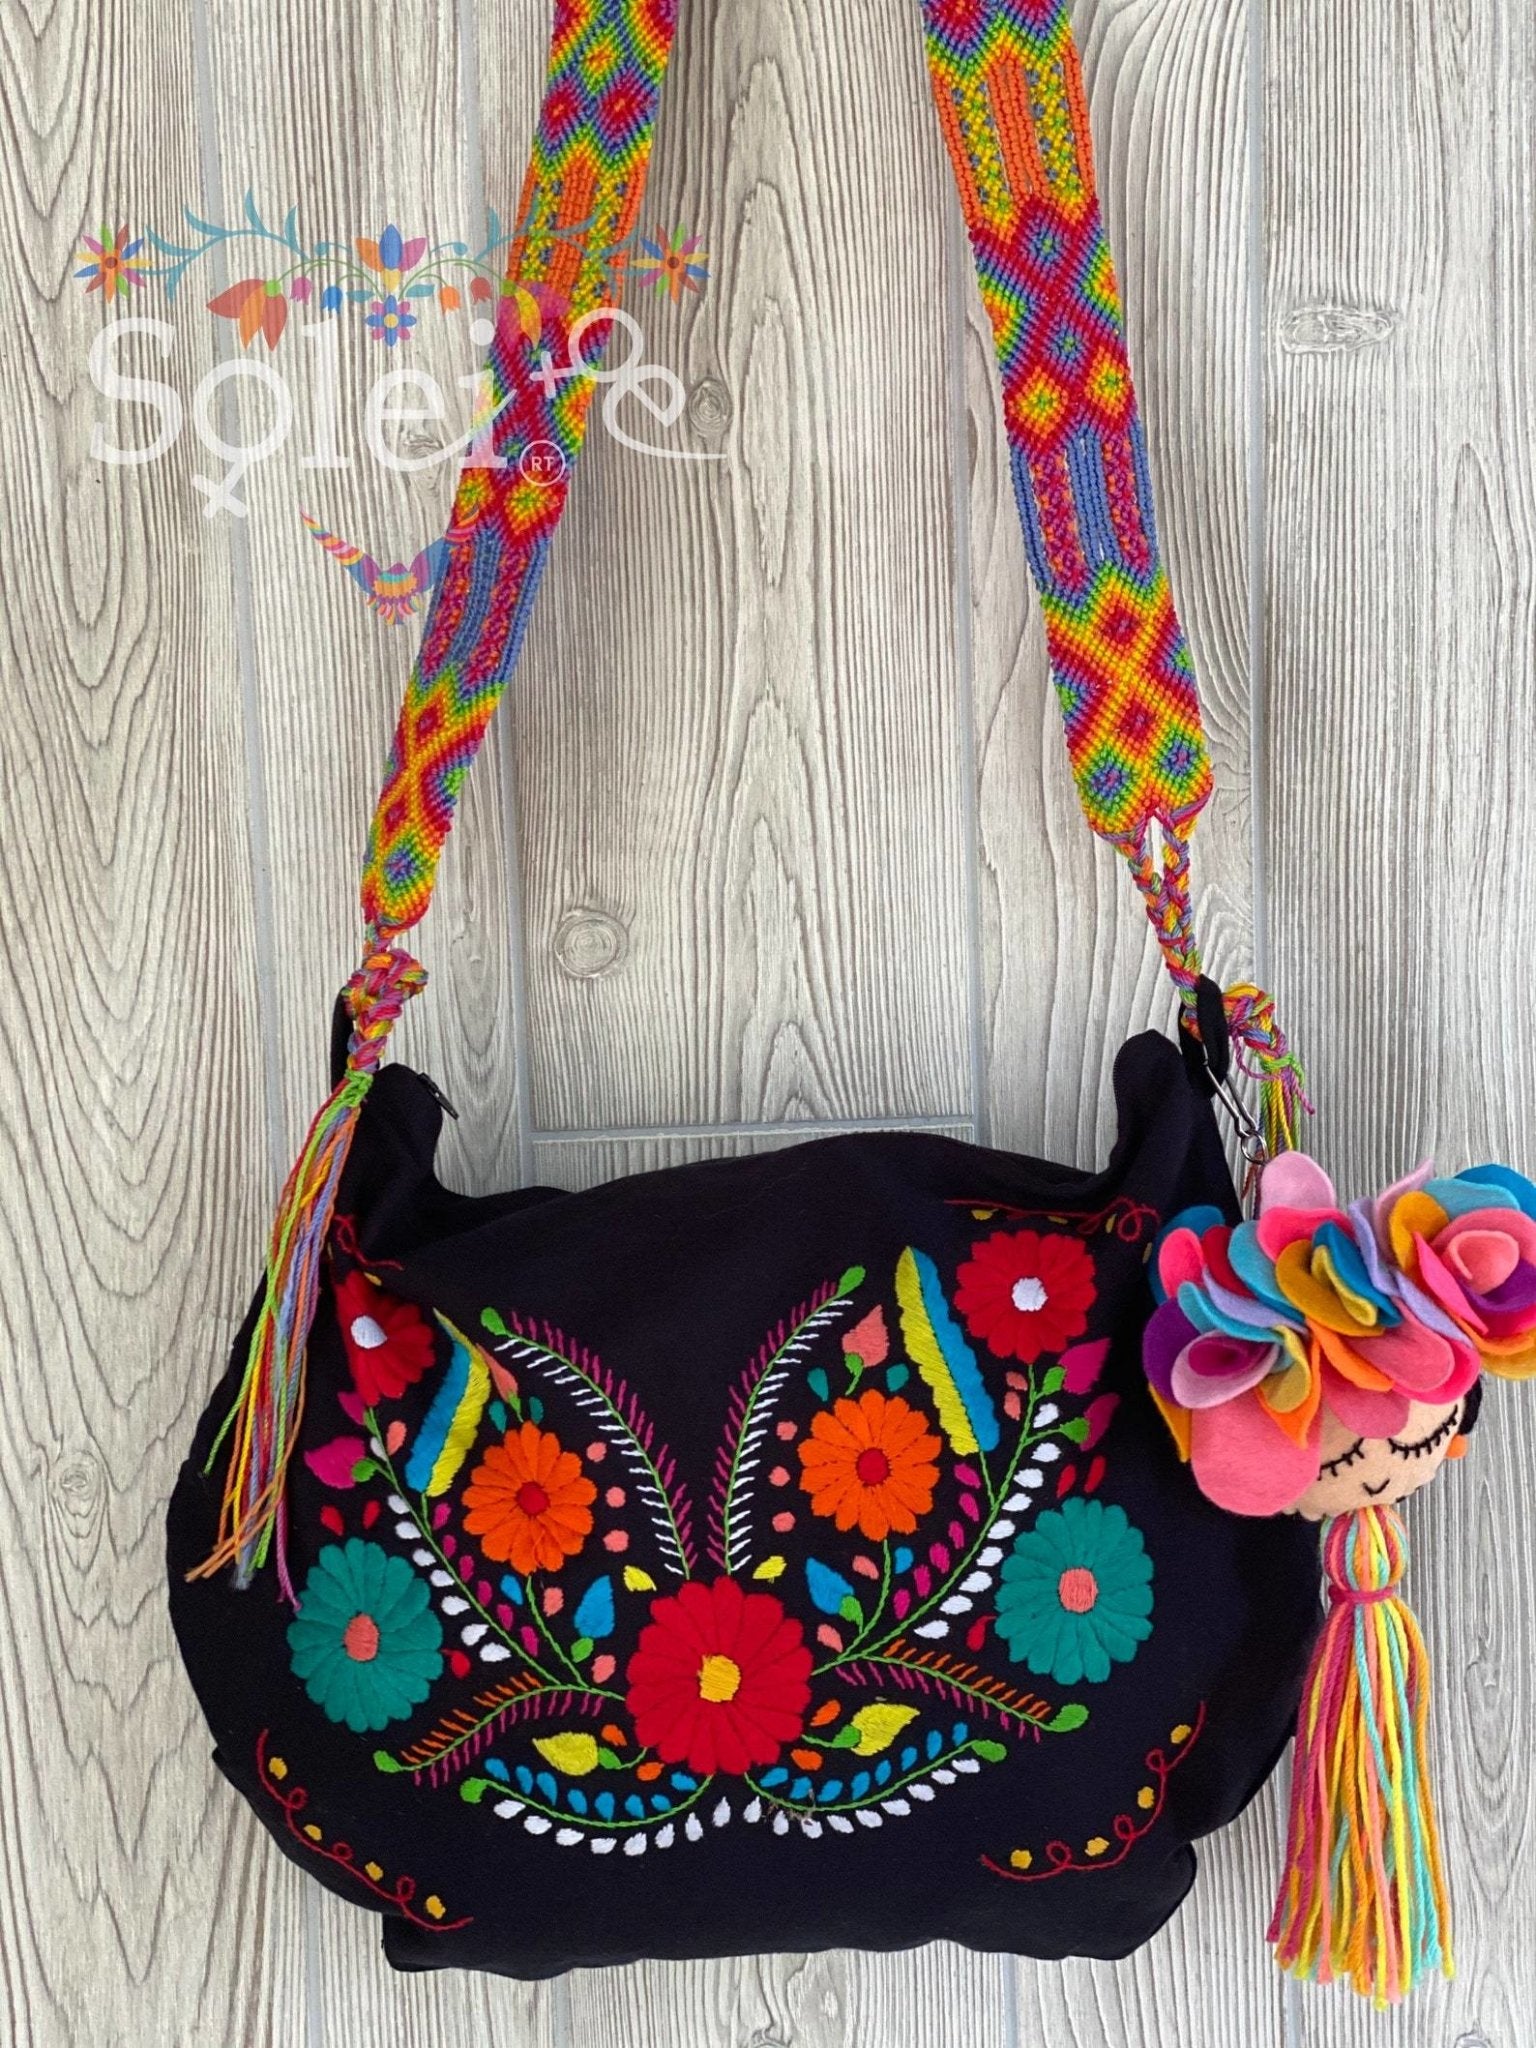 Traditional Mexican Embroidered Bag with Frida Kahlo Tassel. Morral Tehuacan with Frida Kahlo Tassel - Solei Store